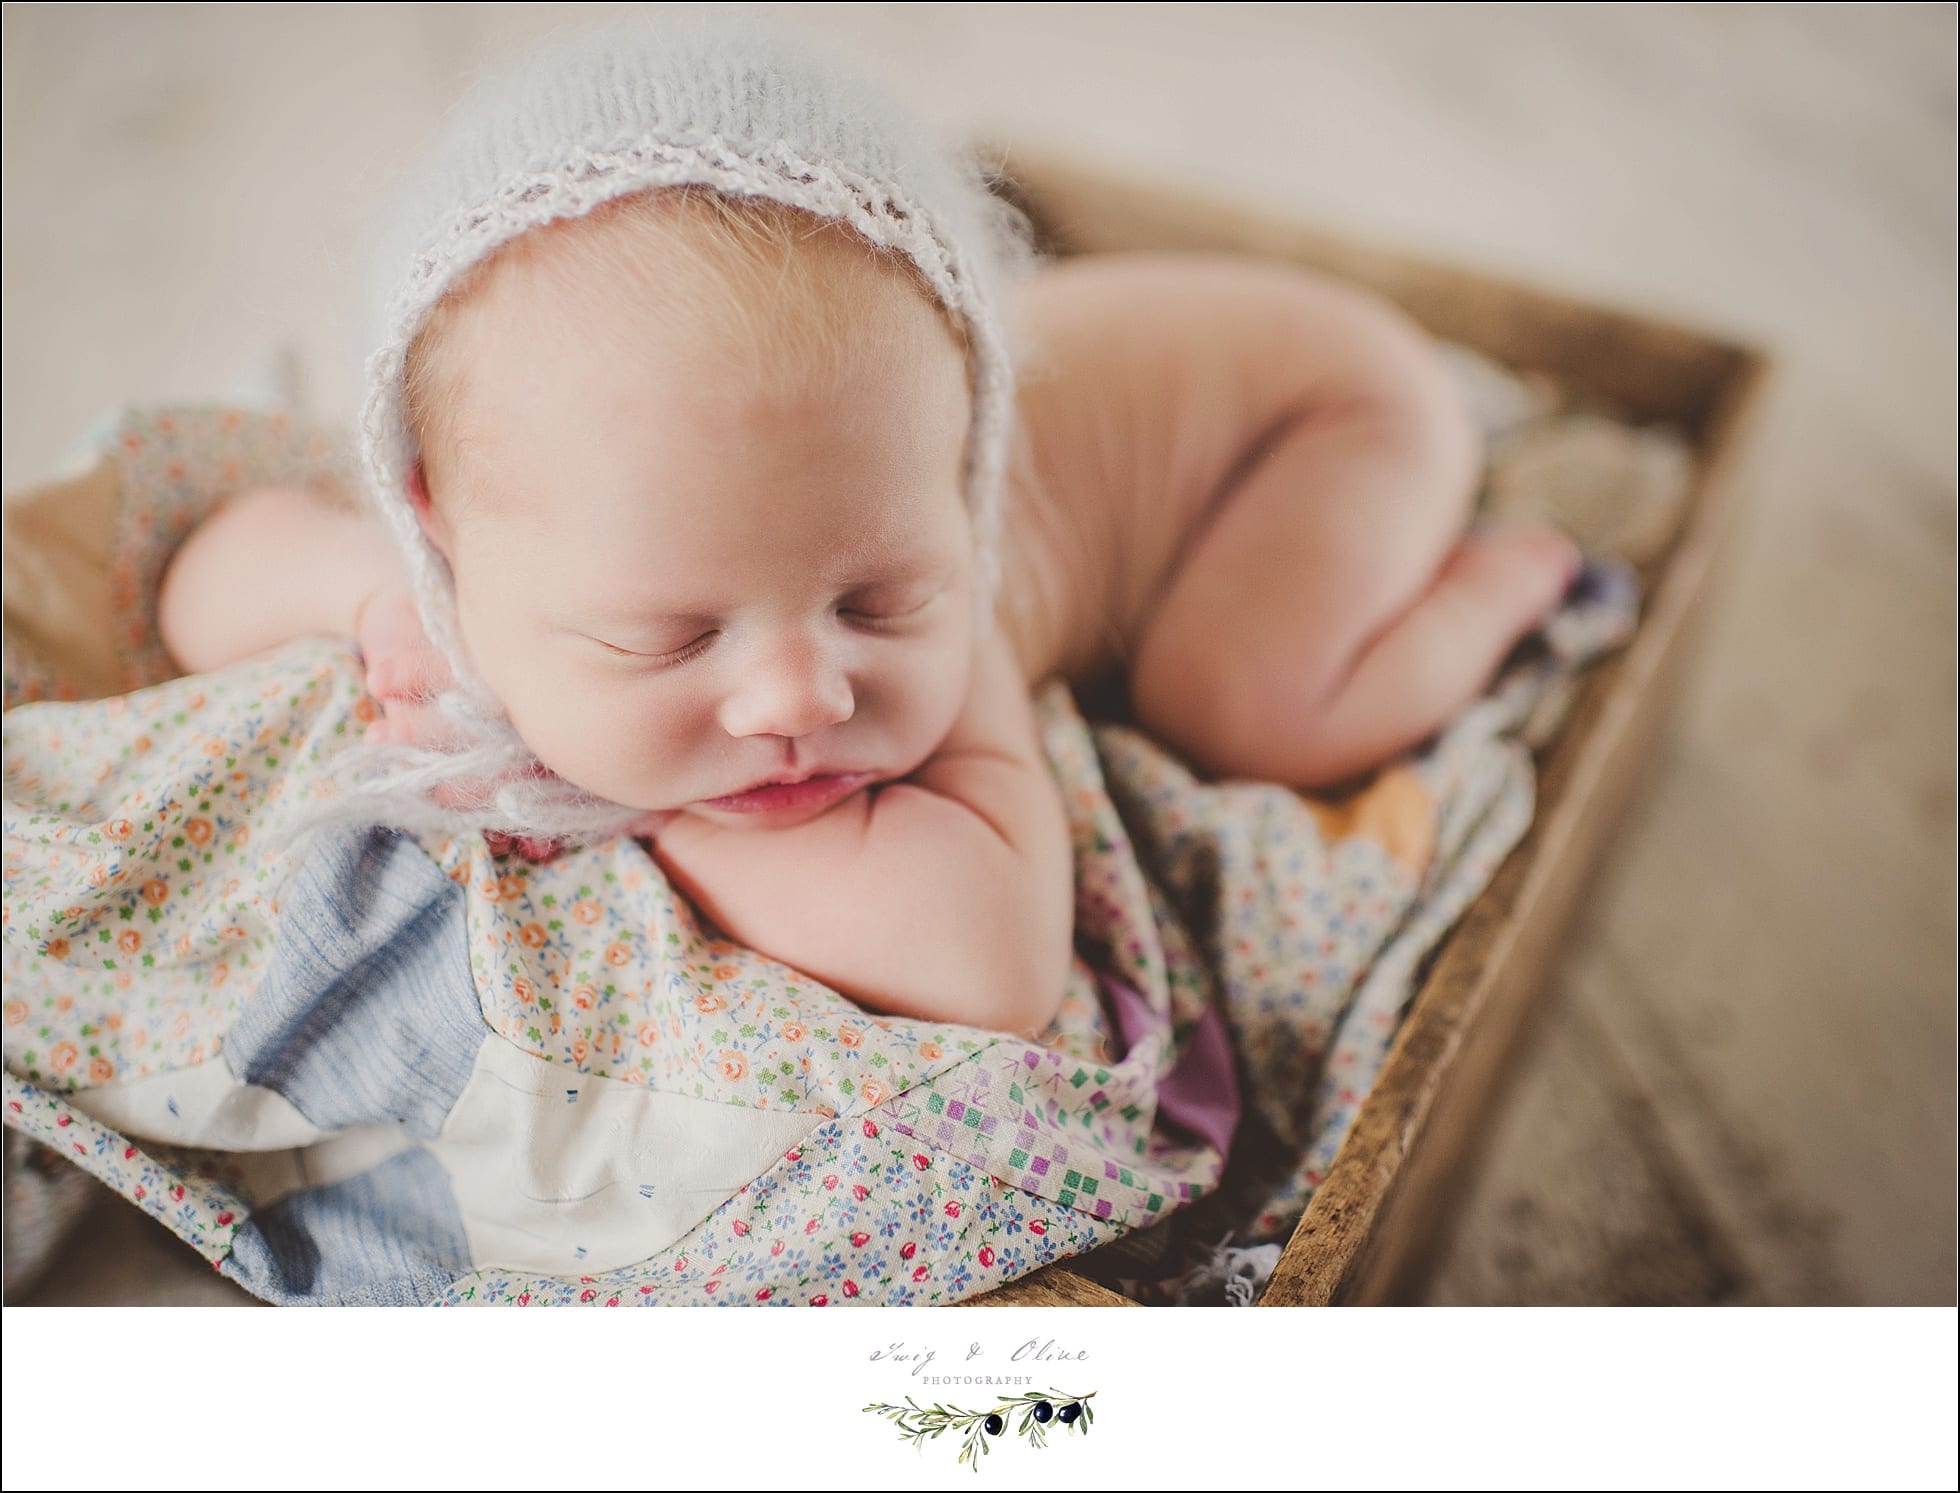 bonnets, blankets, baskets, booties, wraps, wrinkles, little feet, little hands, cherish, babies, Twig and Olive newborn photography